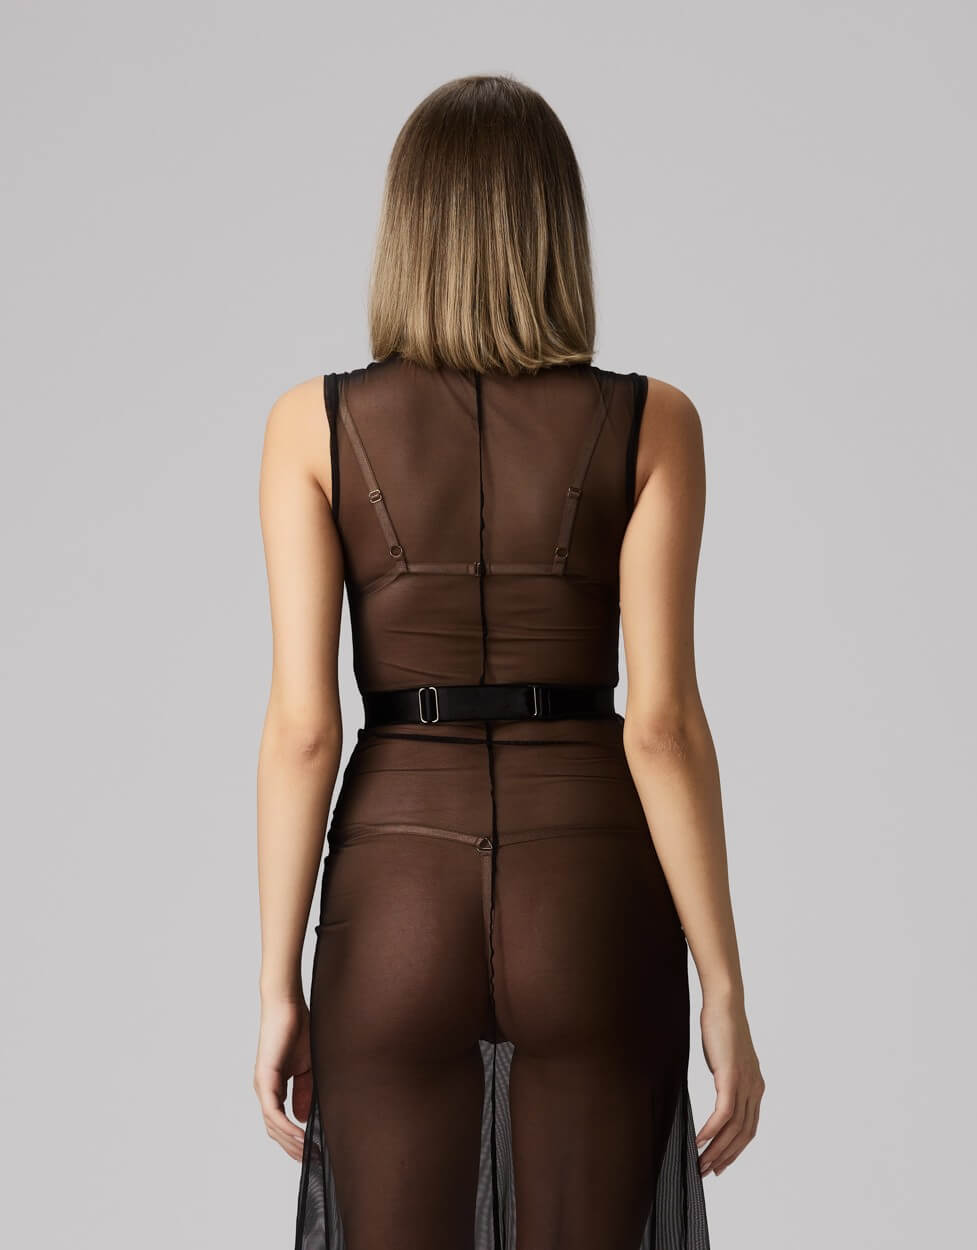 MURMUR Grid Underdress – Oh Baby Luxurious. Sexy. Lingerie.